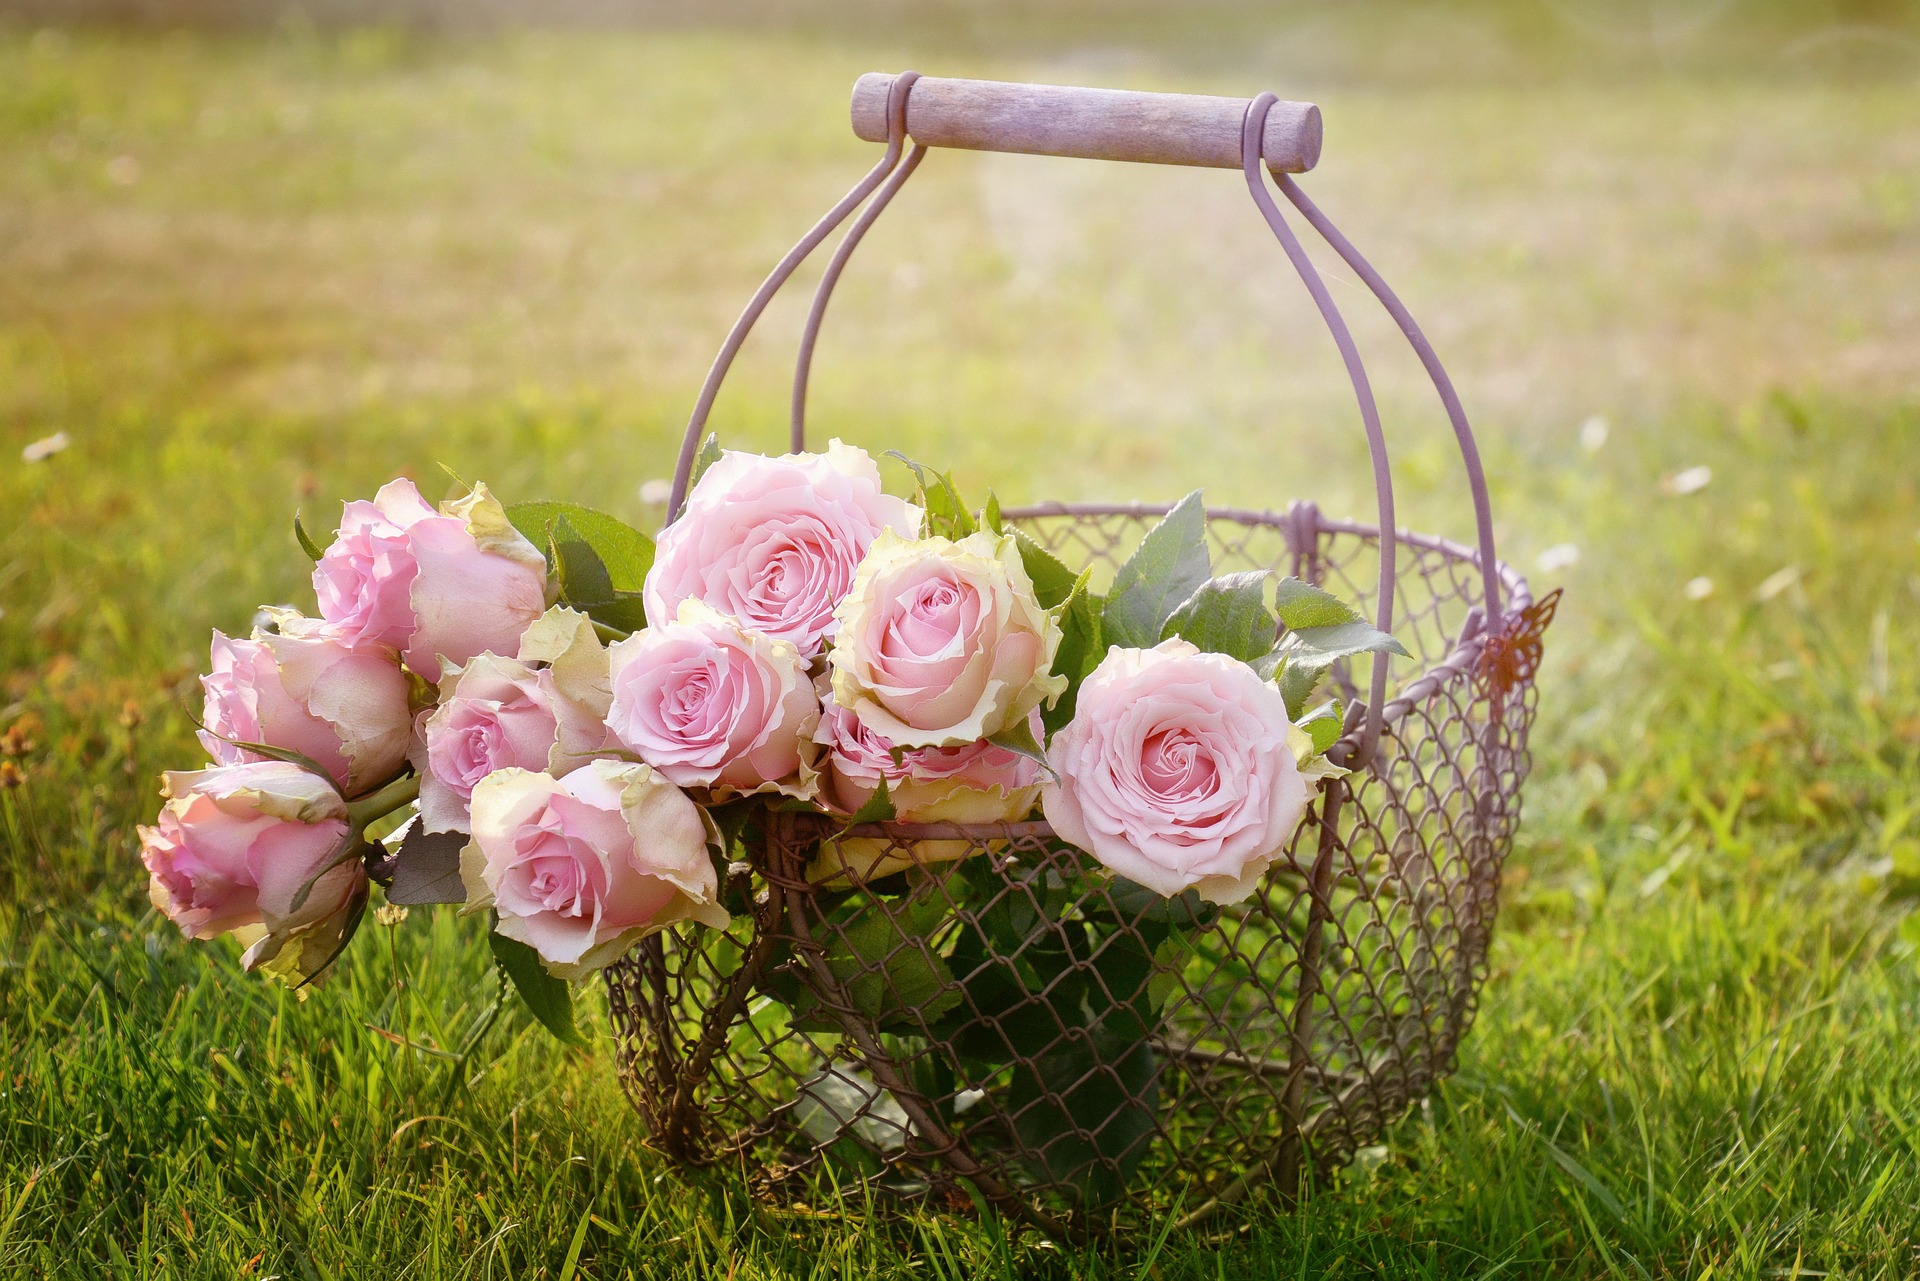 roses in a wire basket